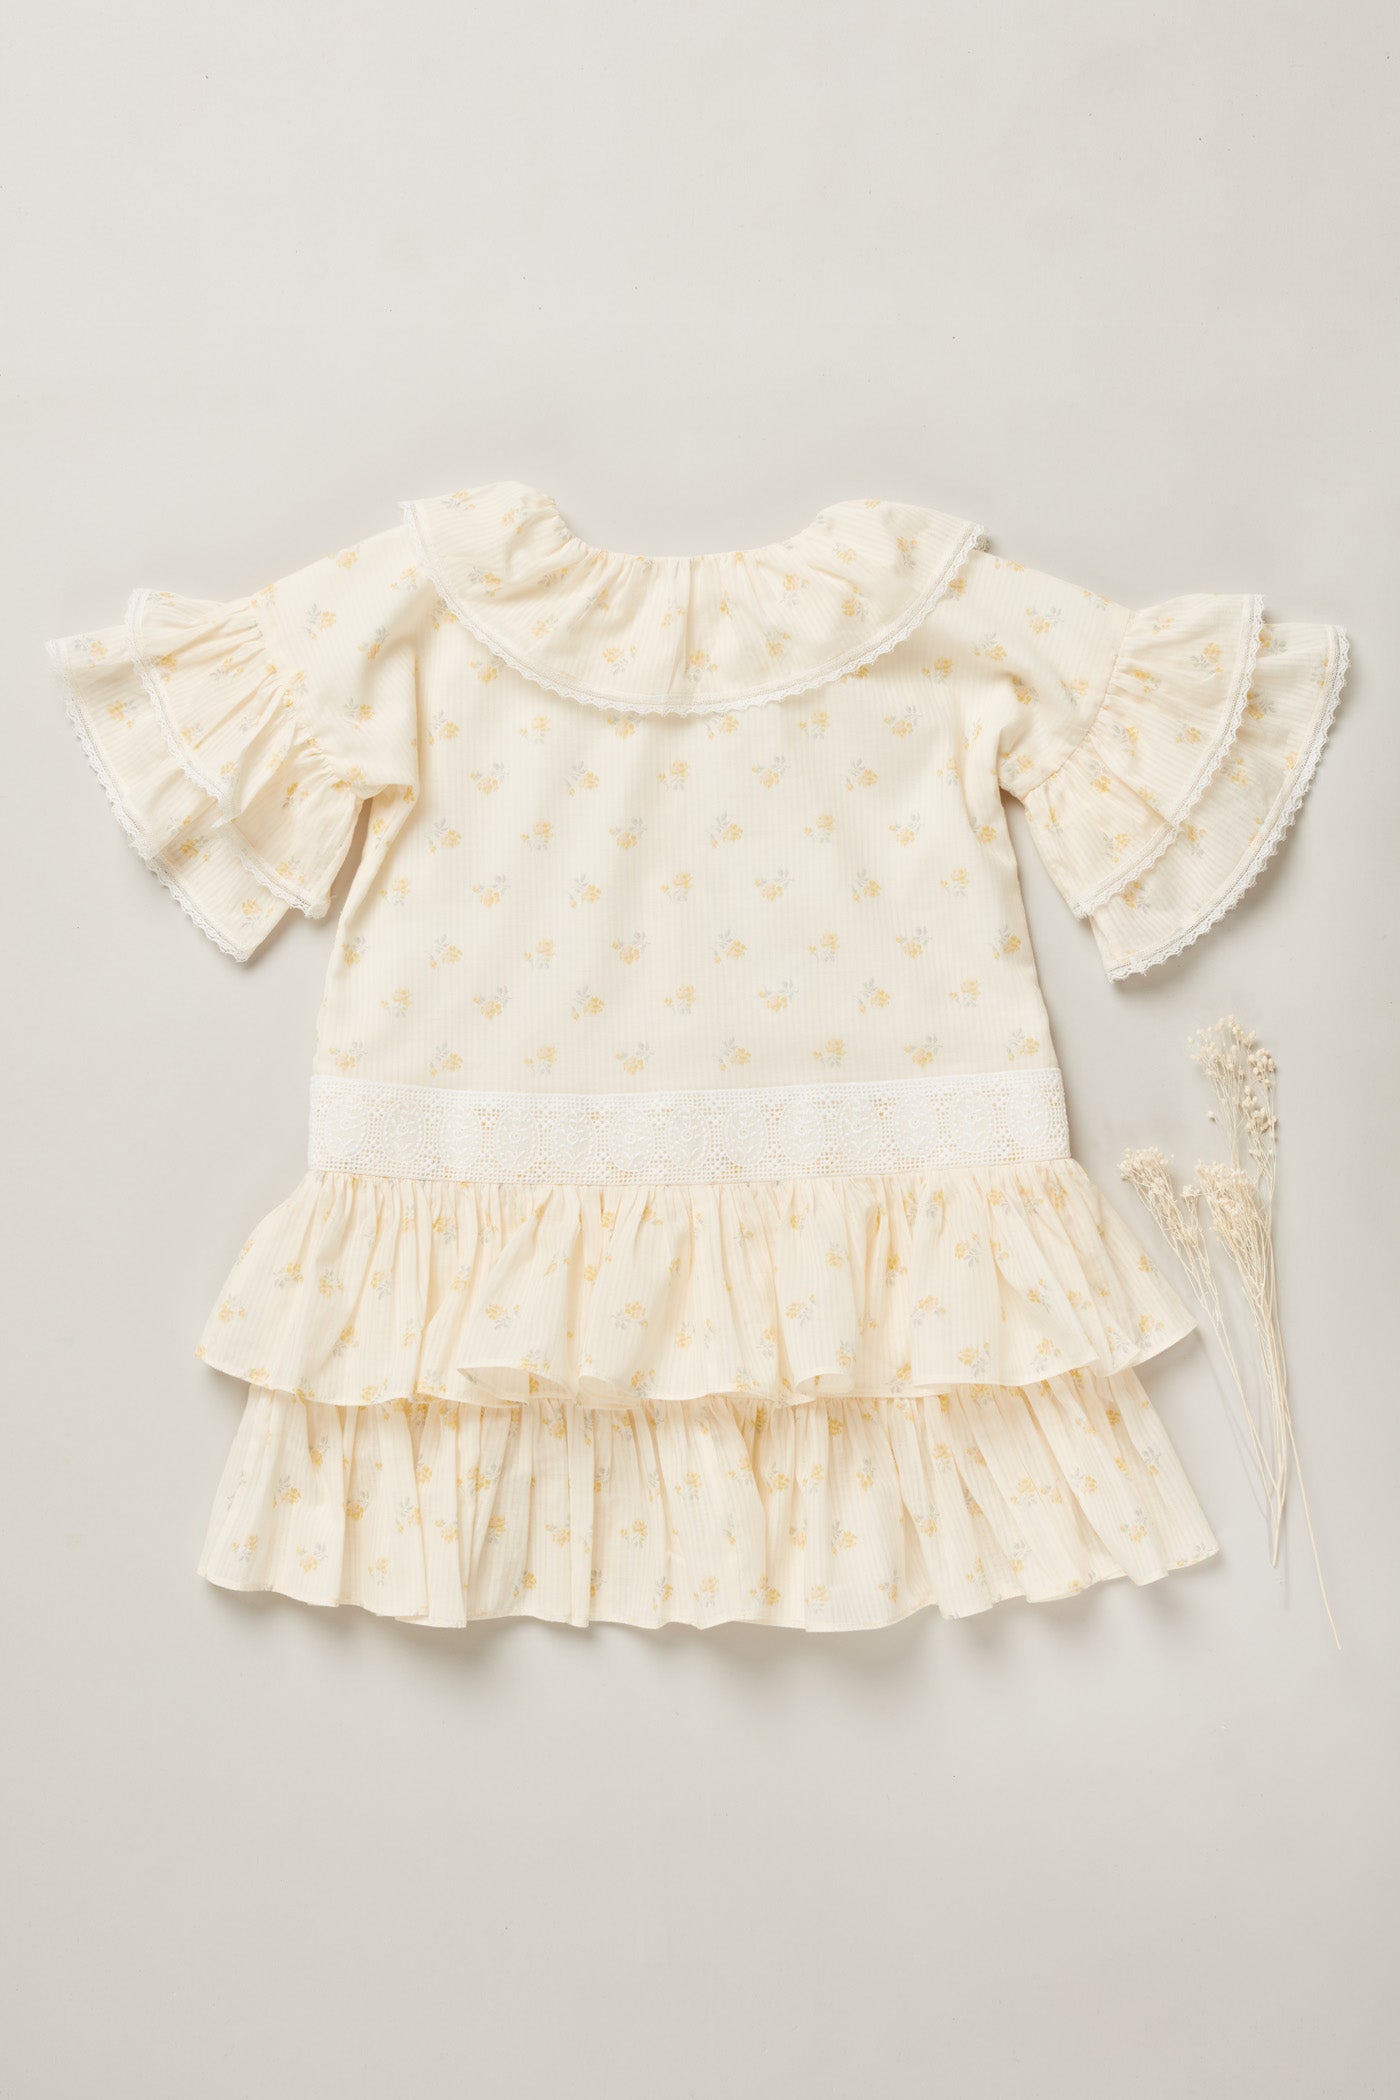 Baby Pastry Dress in Yellow Flowers